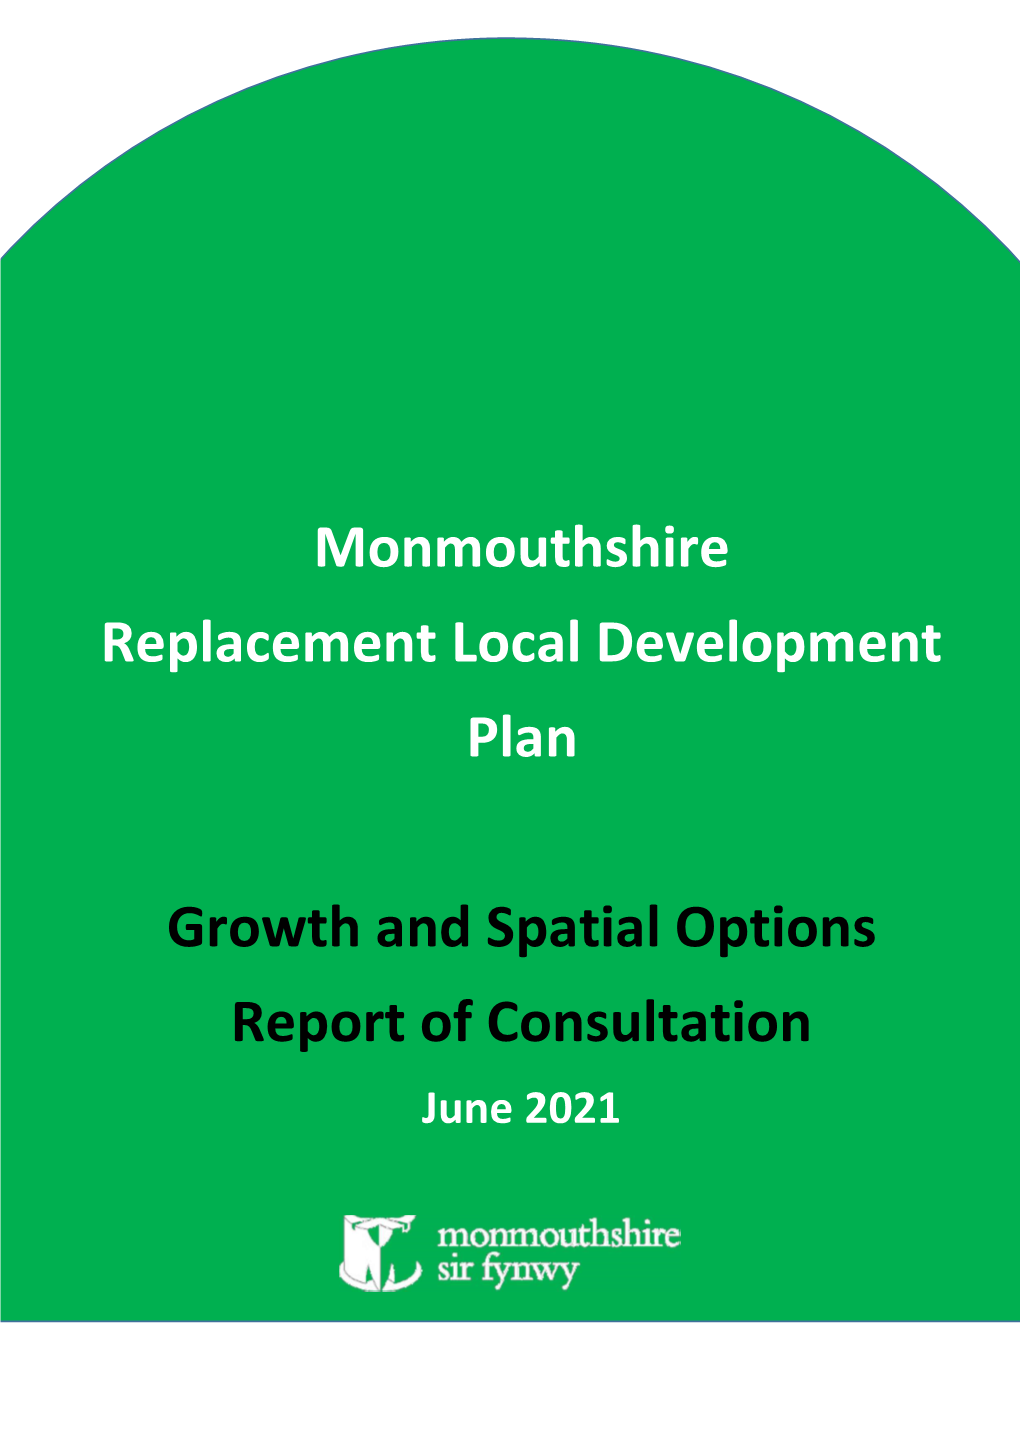 Growth and Spatial Options Report of Consultation June 2021